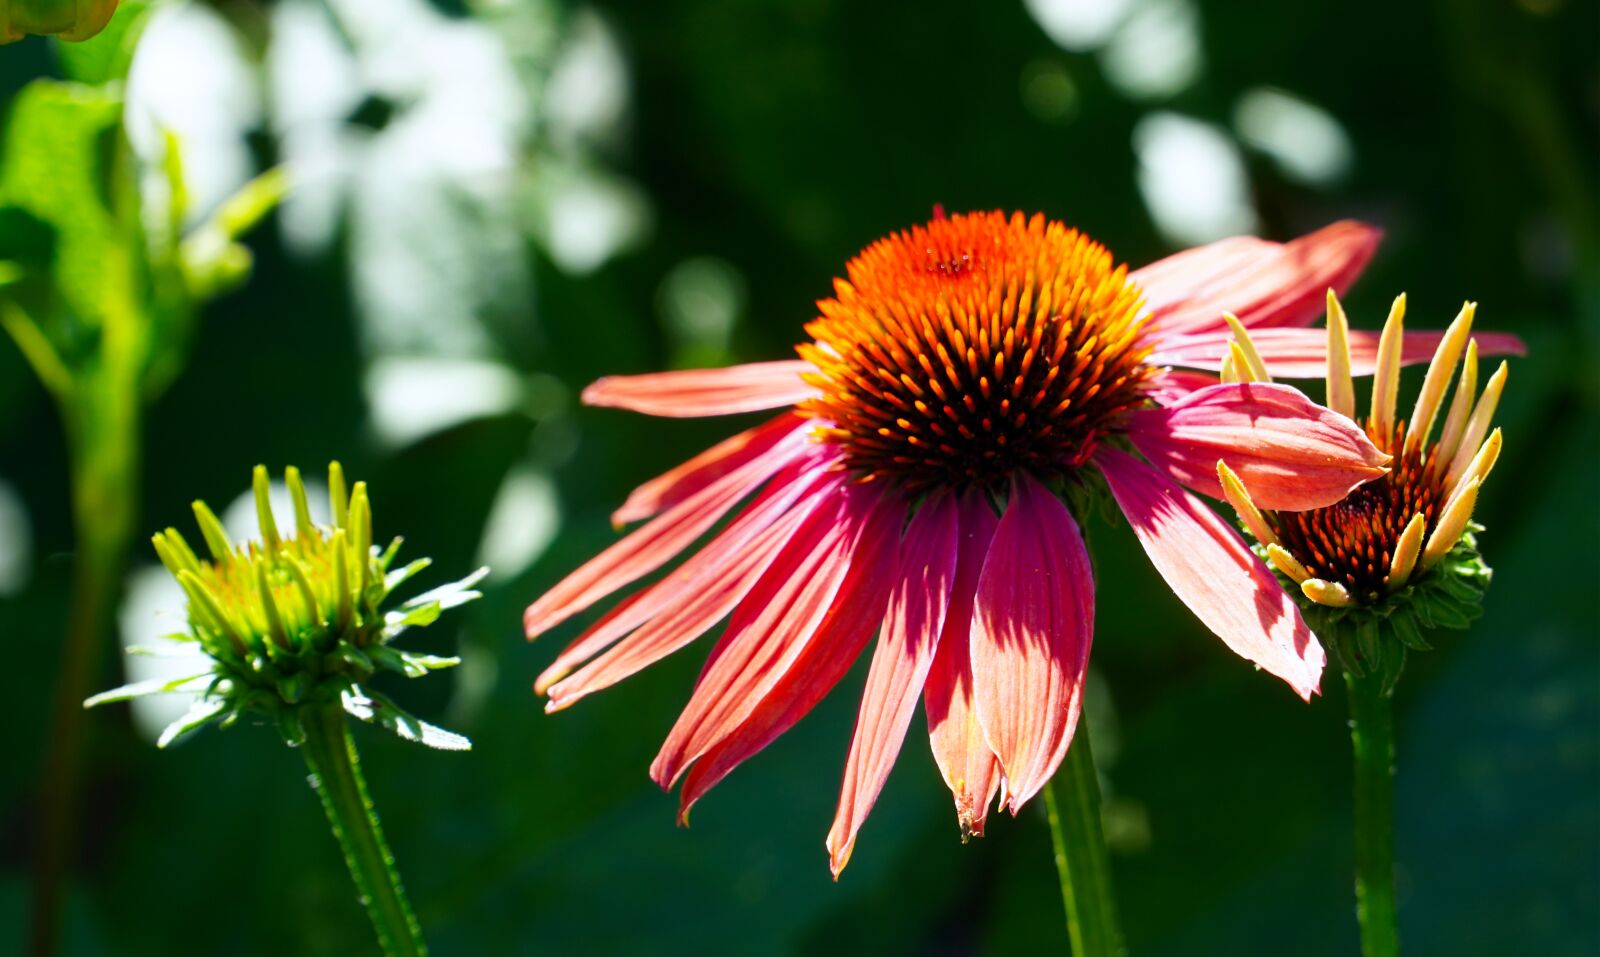 Sony a6400 sample photo. Echinacea, flower, blossom photography